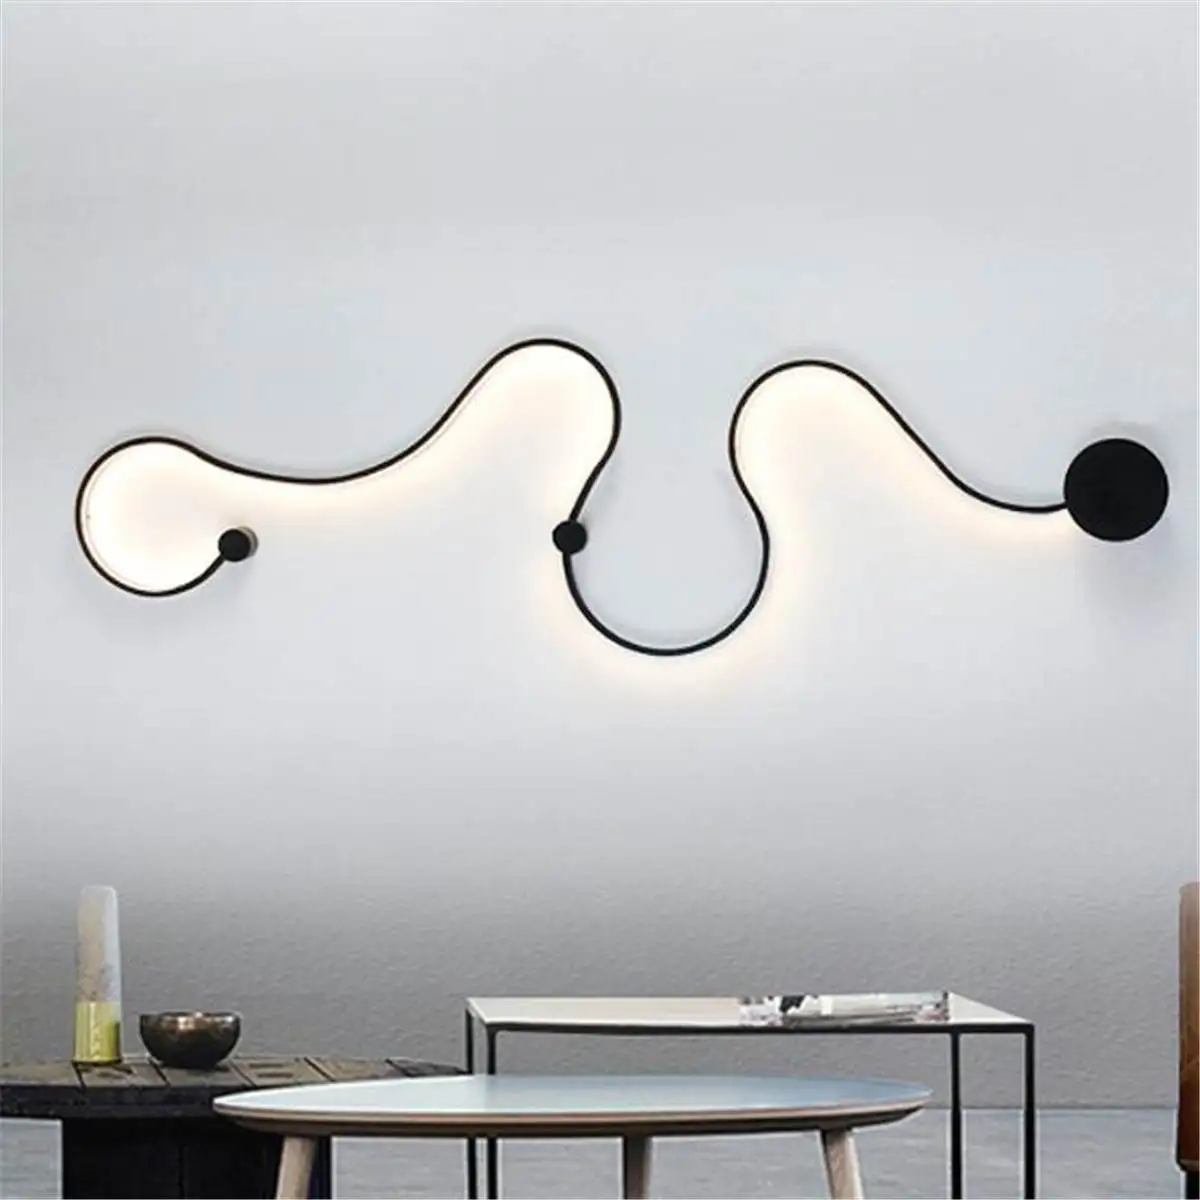  Modern Wall Lamps for bedroom study living balcony room Acrylic home decor in White black iron body - 4000266358096